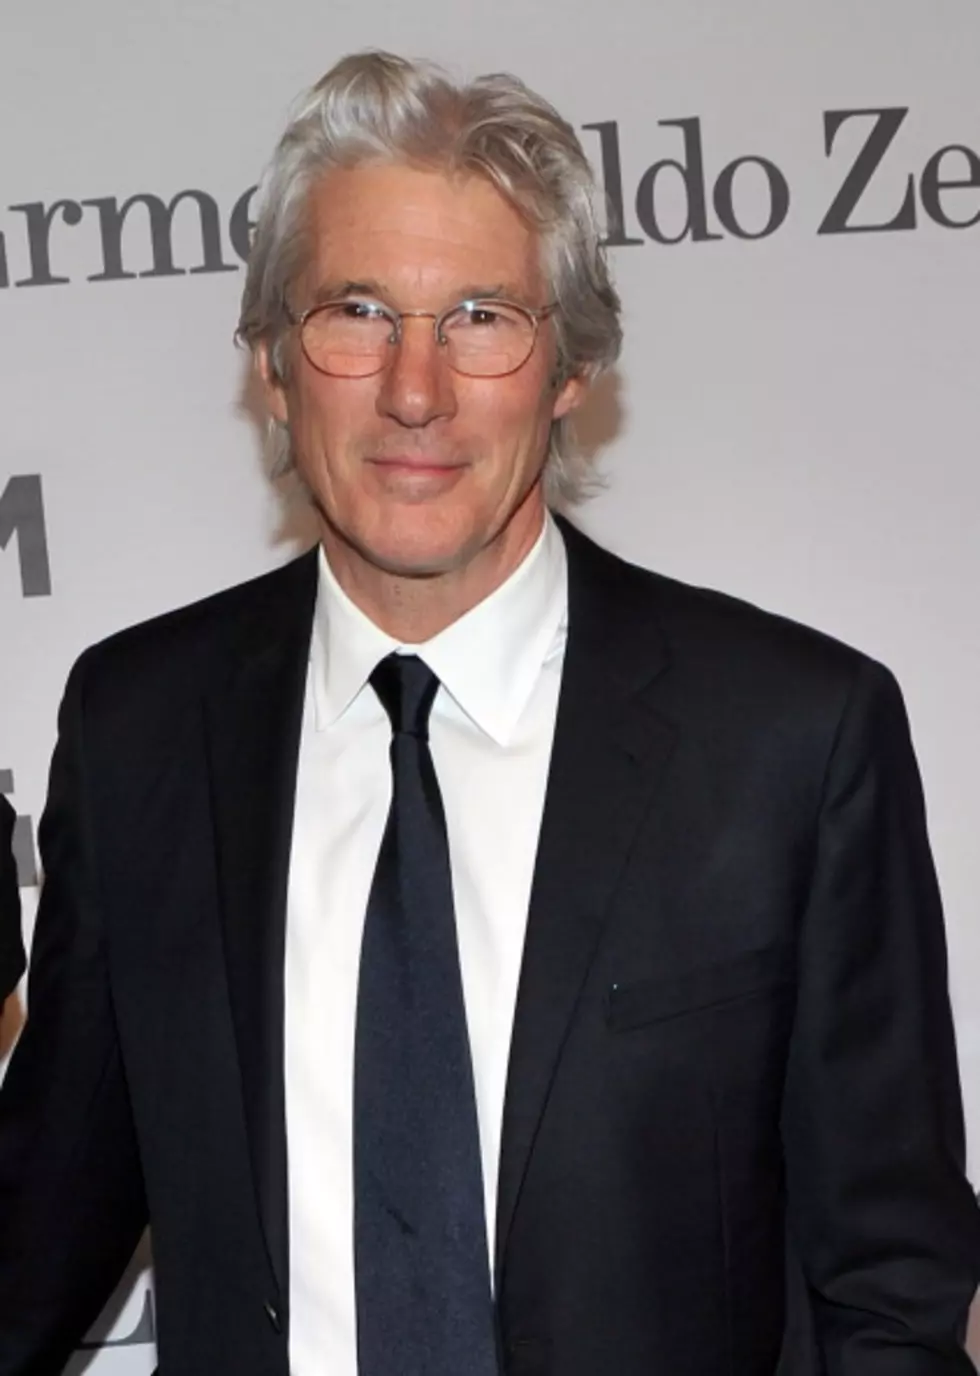 Celebrity Birthdays for Wednesday August 31 Include Richard Gere and Debbie Gibson